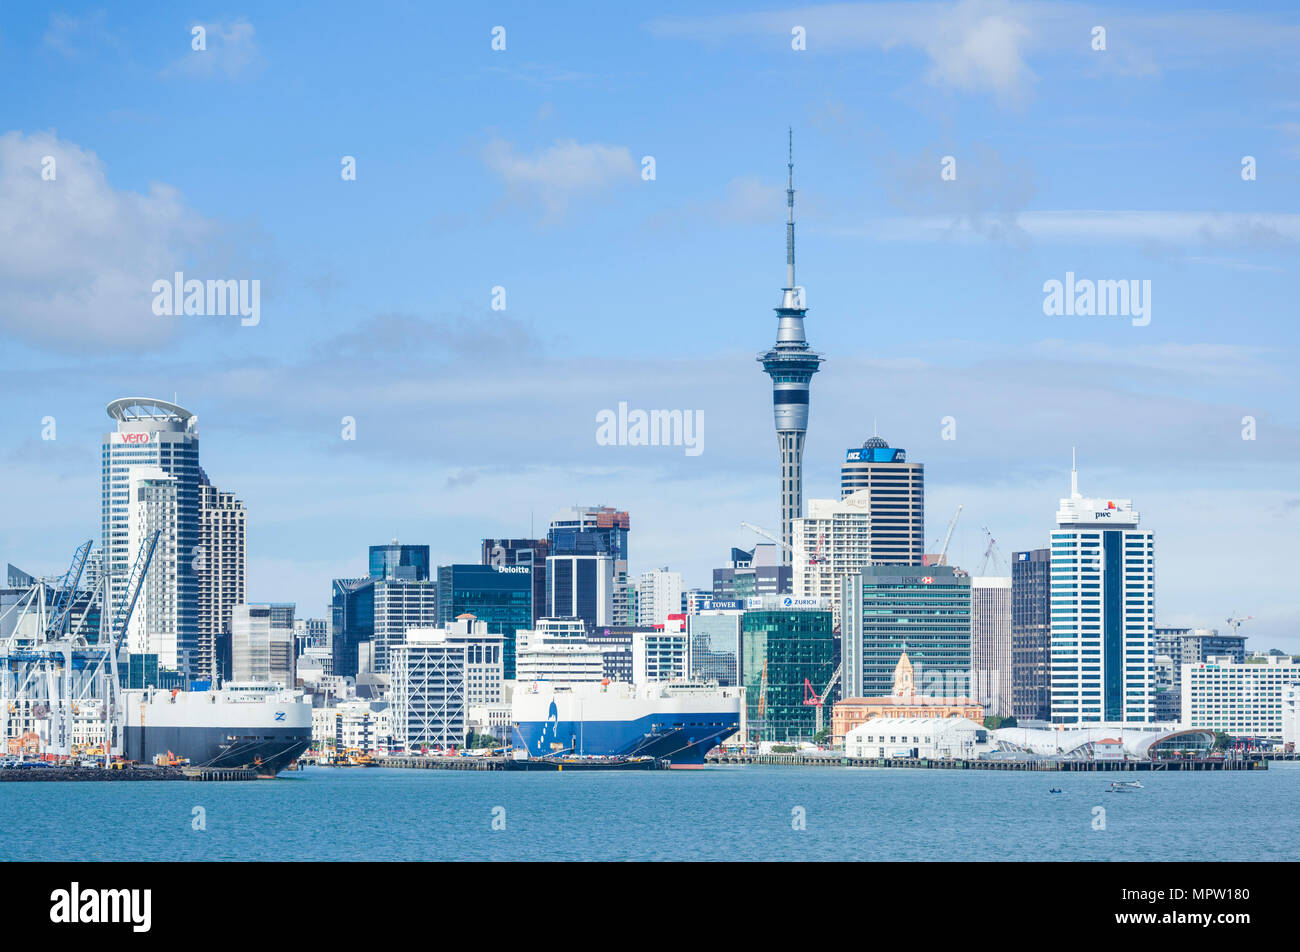 new zealand auckland new zealand north island auckland skyline Waitemata Harbour panorama of cbd sky tower and wharf area of the waterfront auckland Stock Photo